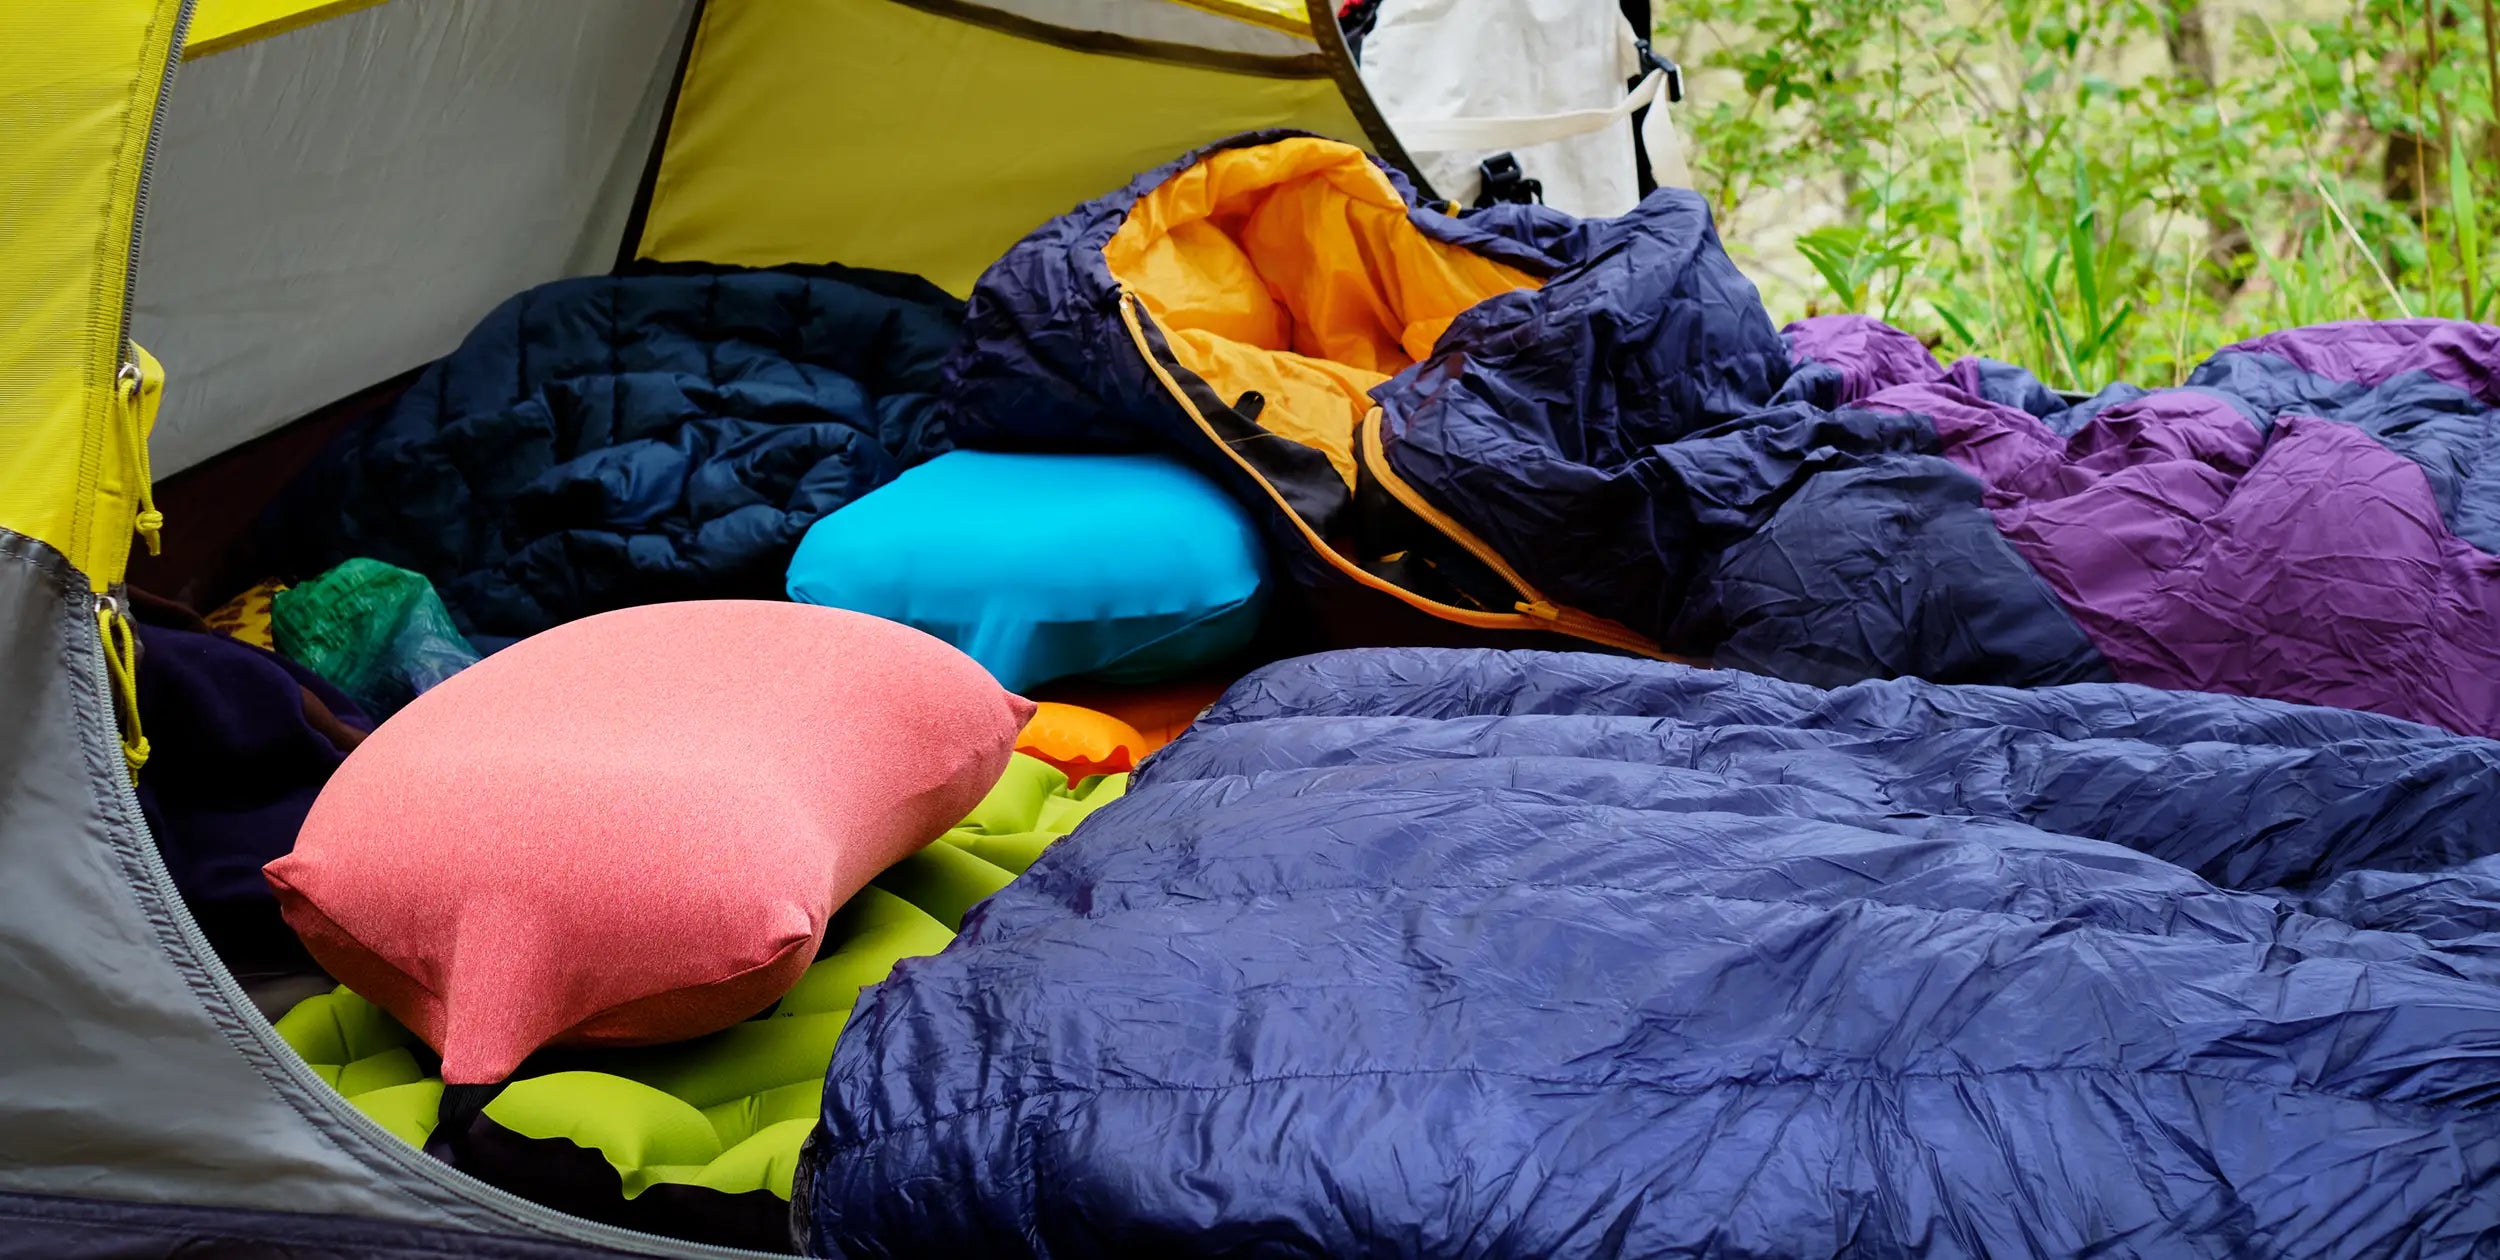 Cozy tent camp with two Pillow Strap camping pillowcases in tent with a sleeping bag and quilt.